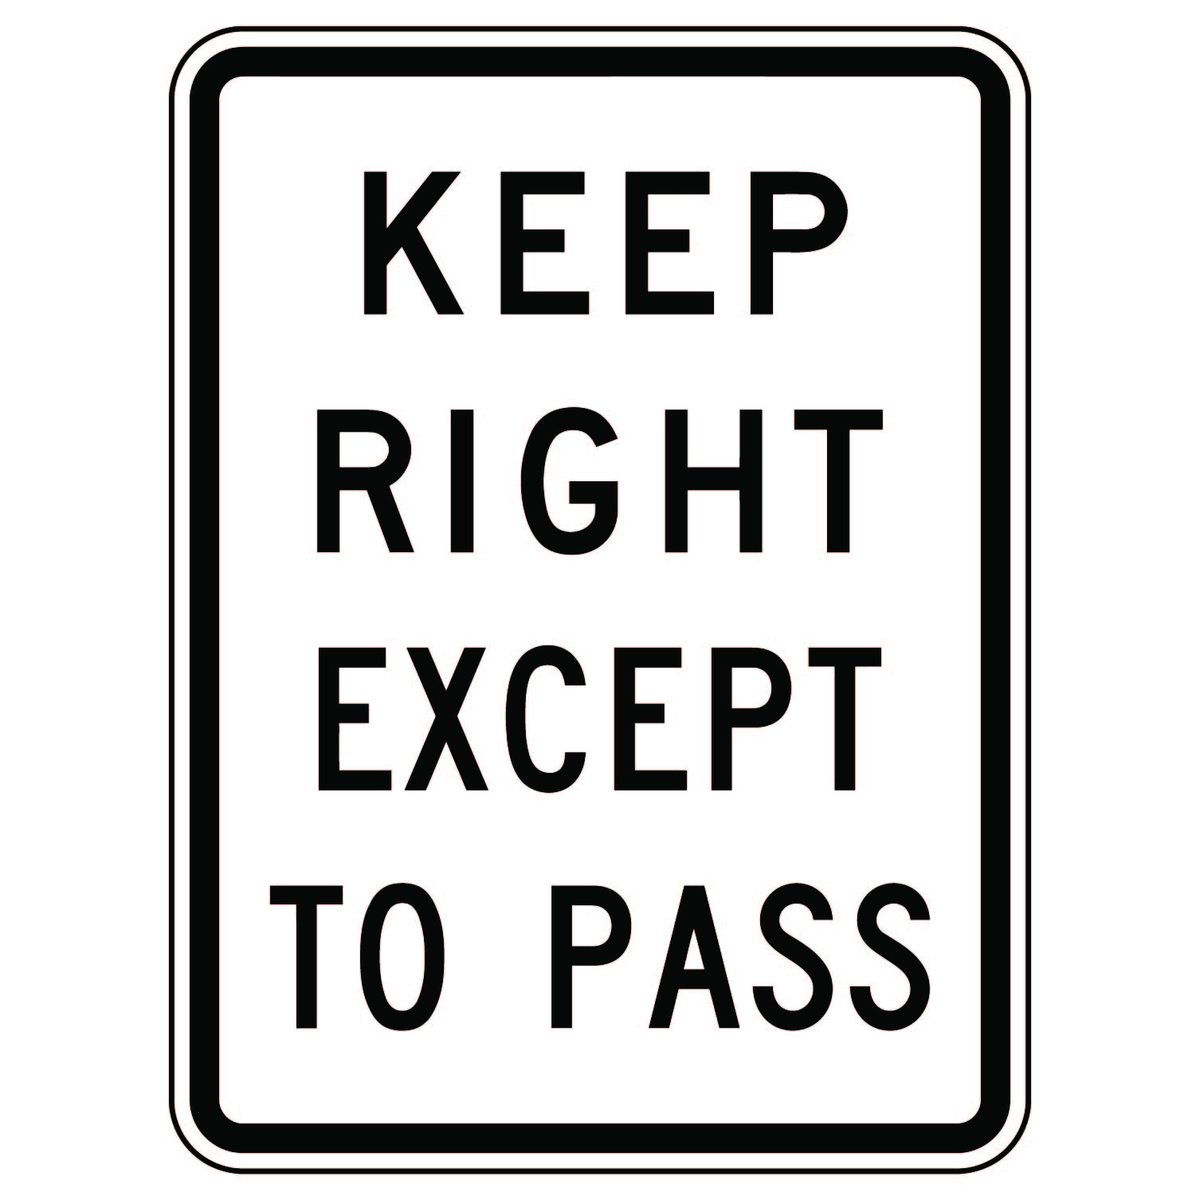 One could argue that this is the most ignored sign in North America...change my mind!? DON'T FAIL YOUR DRIVER'S TEST COURSE PKG smartdrivetest.com/new-drivers/sm… We include as a bonus both the winter and defensive driving in the above course package. #driving #drivingschool